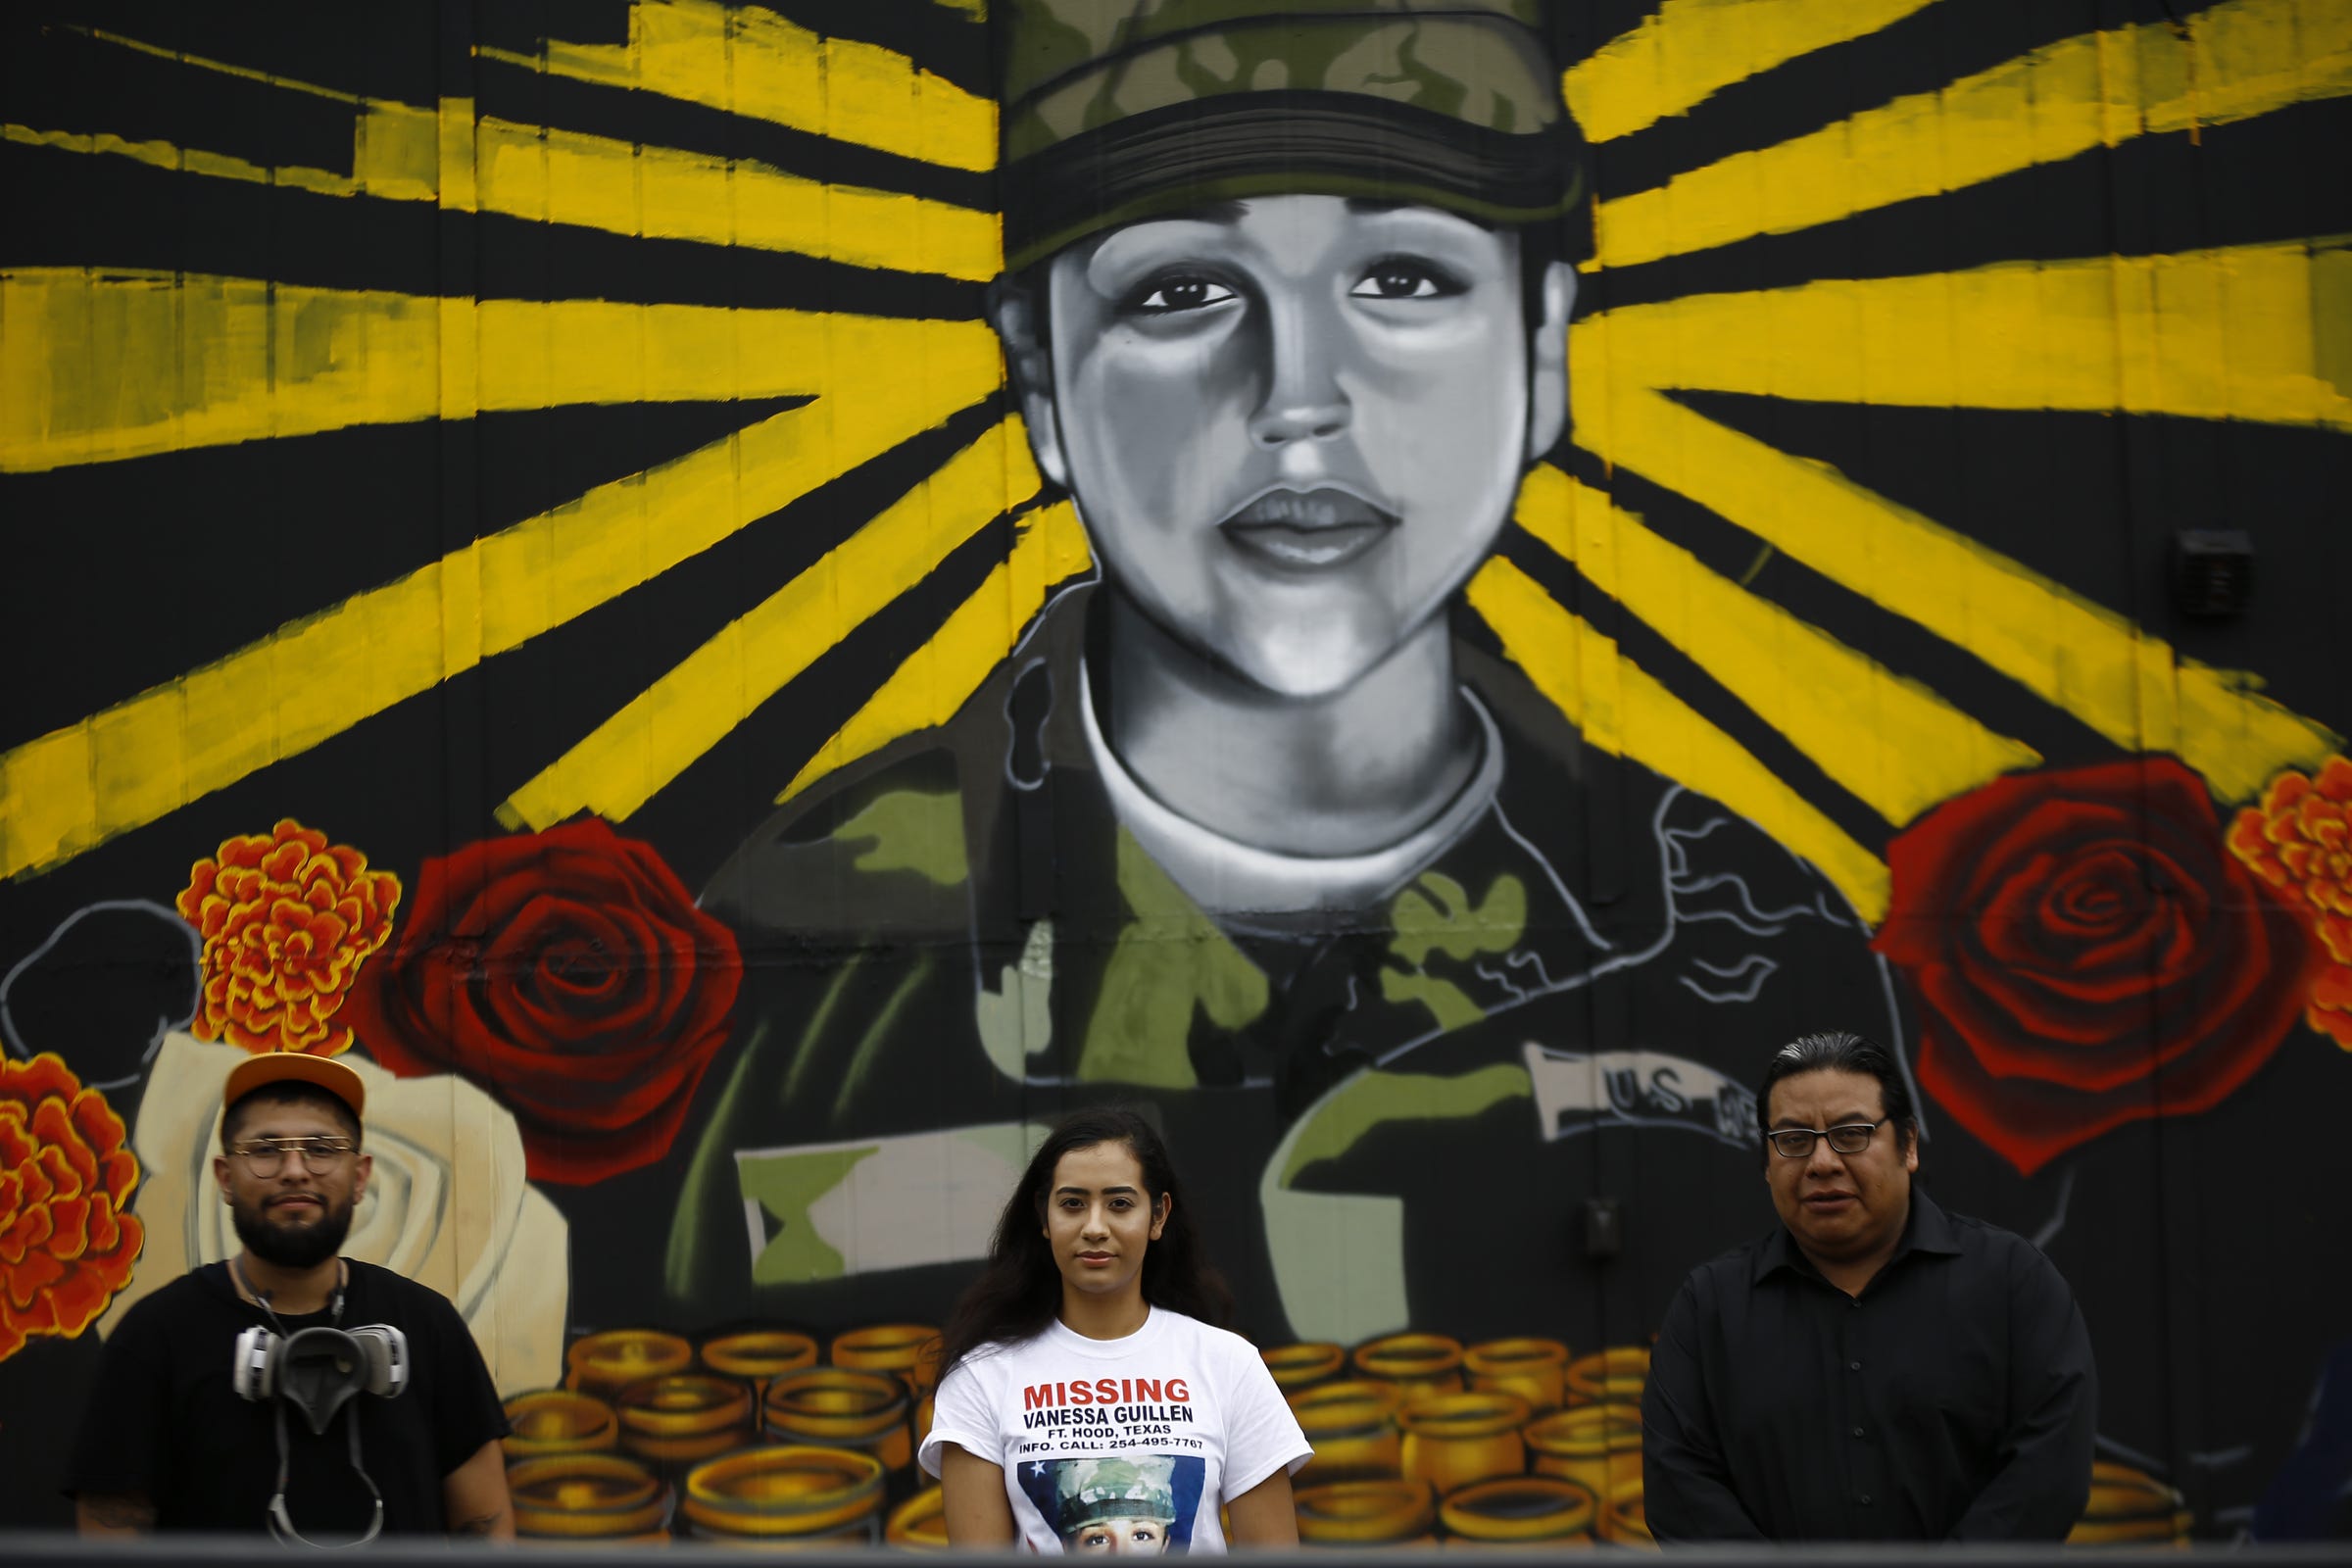 Muralist Freddy Diaz of Detroit creates a mural for Vanessa Guillen, the army soldier who went missing from Fort Hood, in Central Texas on April 22, 2020. With the help of Yahaira Gomez of Detroit who raised funds for the mural and Gabriel Martinez, the owner of Bodega Cat who allowed the mural to be painted on his building, the mural will be unveiled on Saturday.